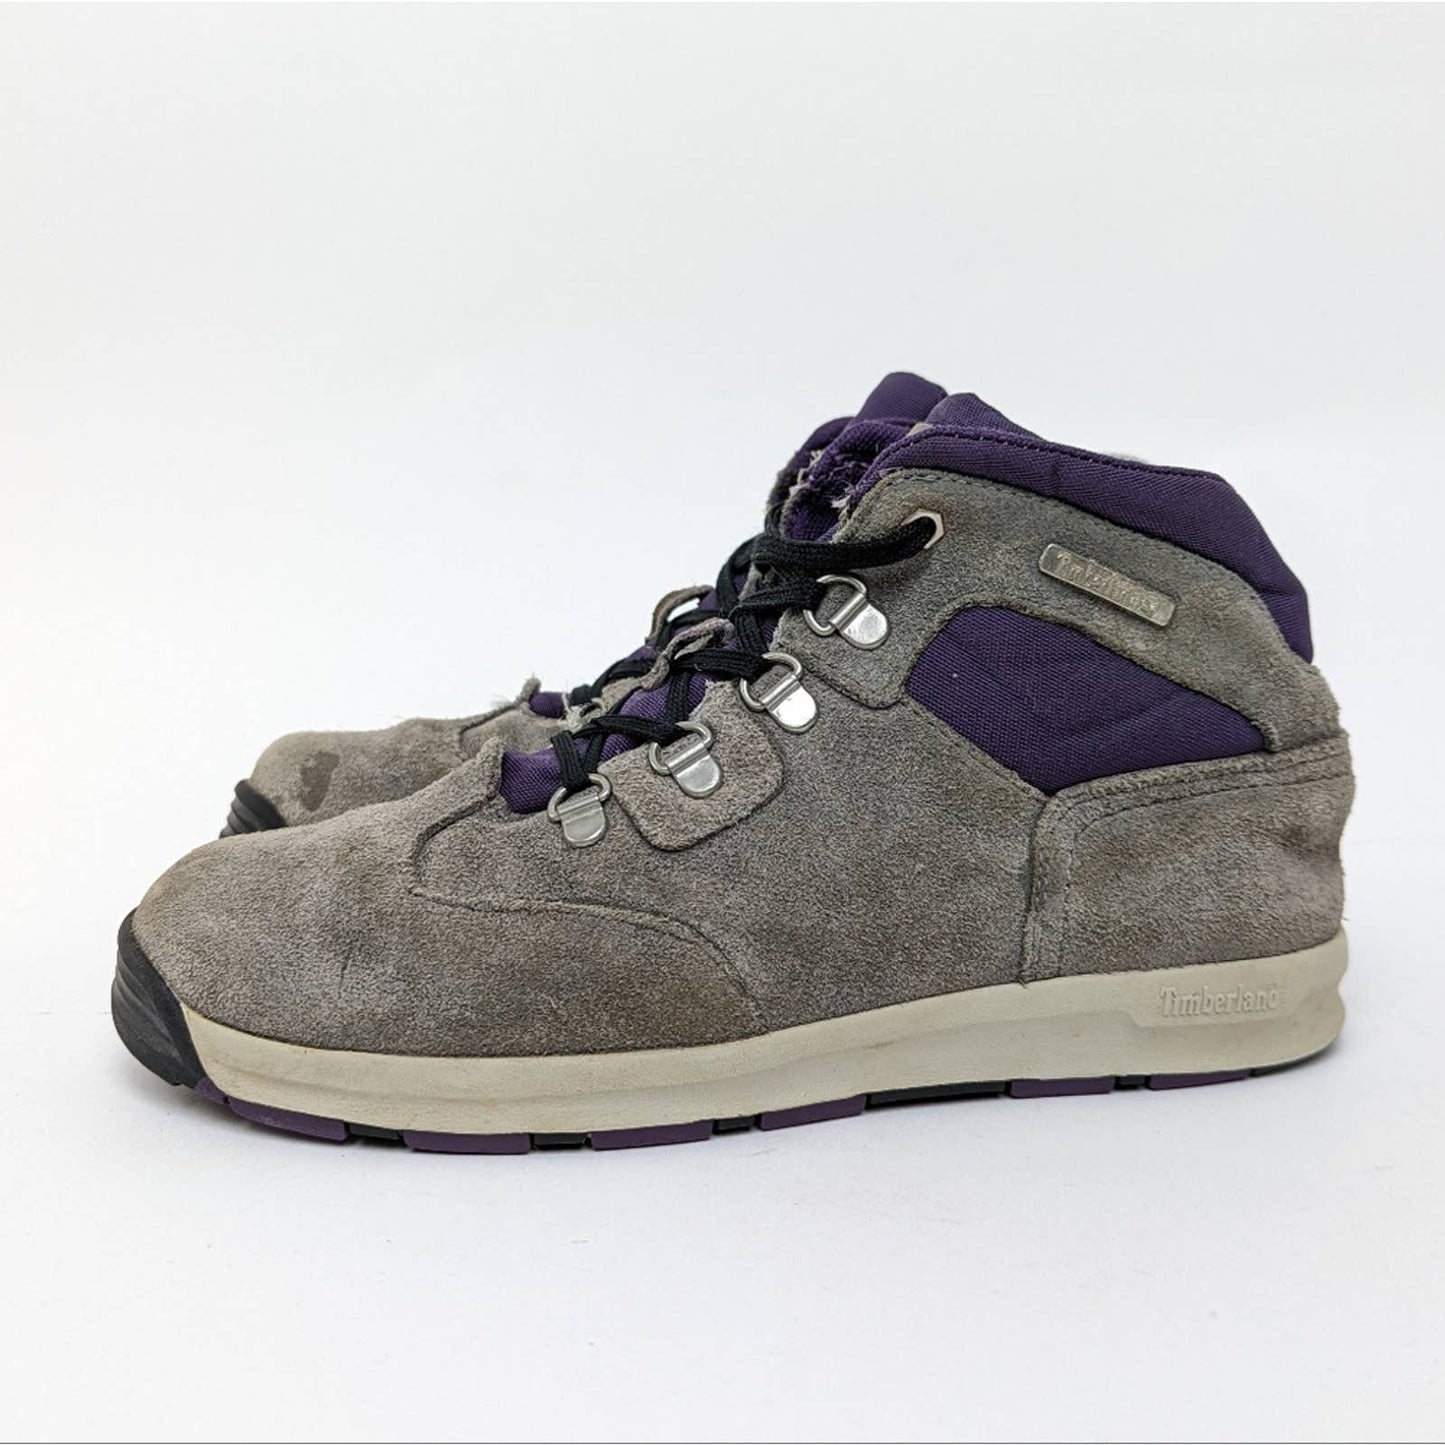 Timberland Suede Leather Mid Top Chukka Hiker Boot Sneakers - 6/8